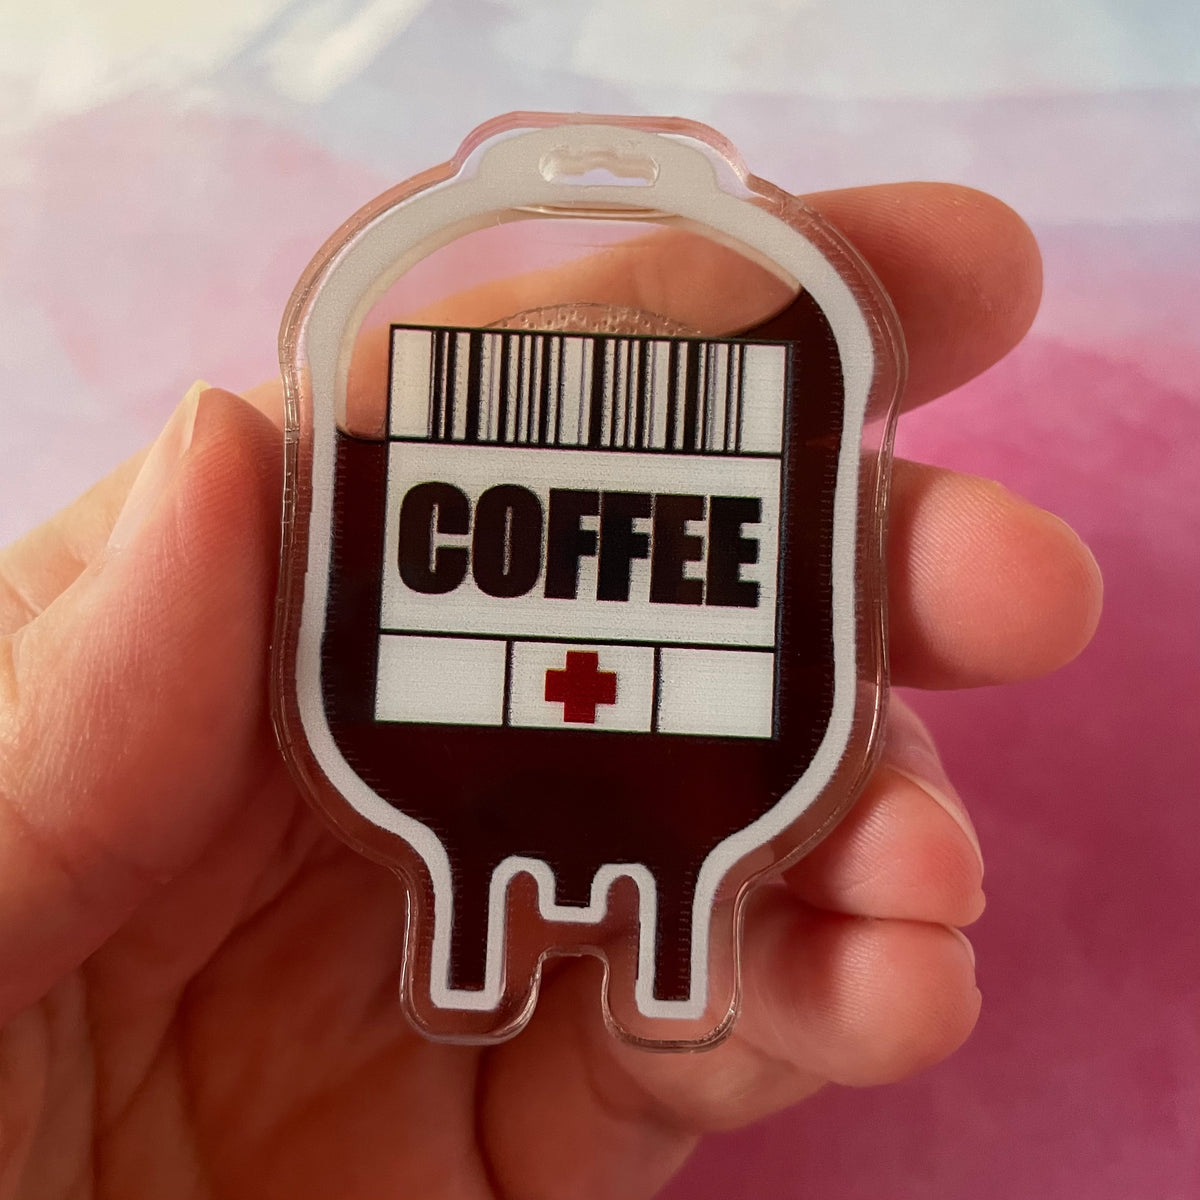 Coffee IV Bag - Liquid Filled Swappable Badge Reel Design TOP